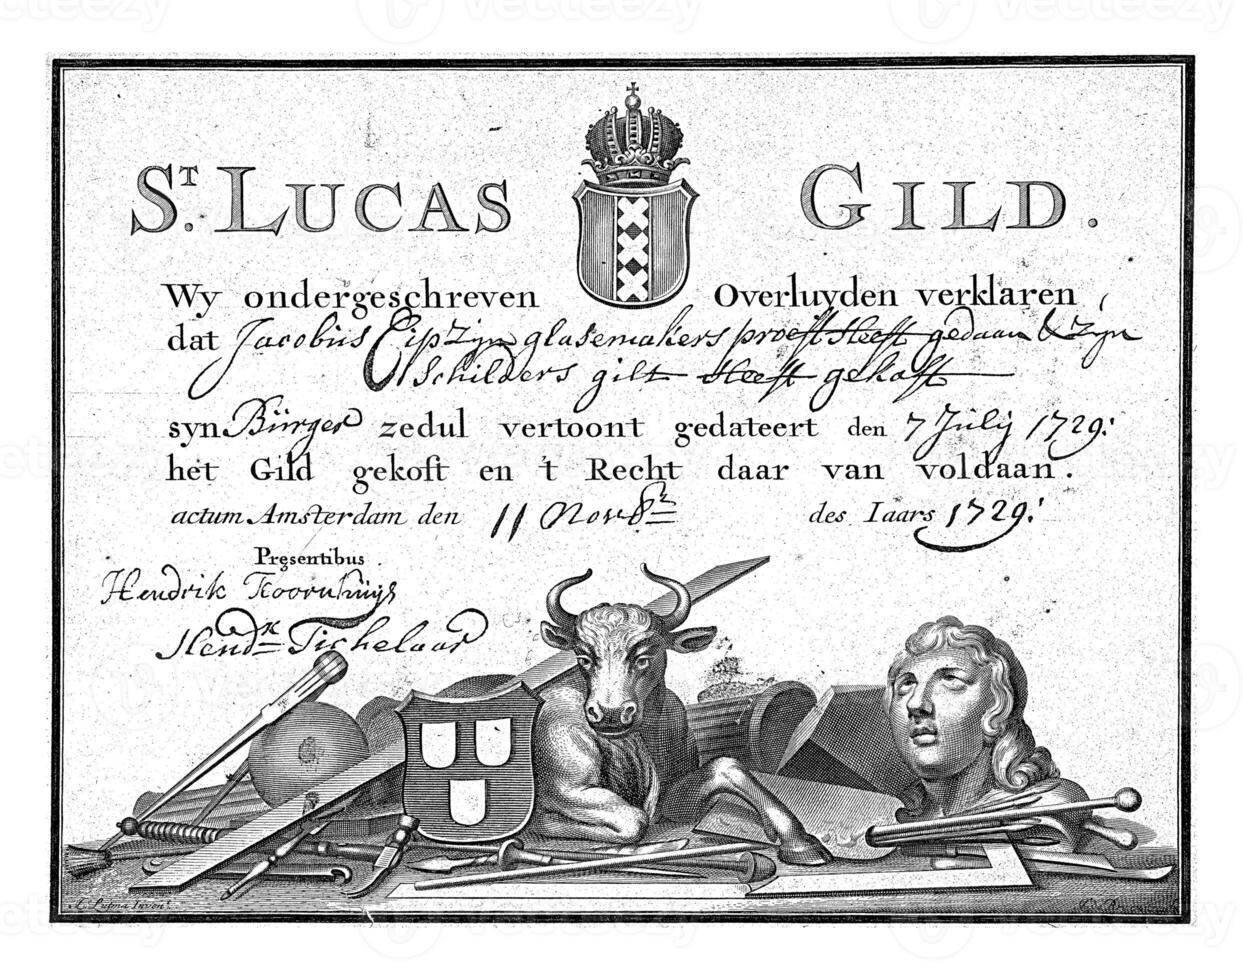 Guild letter of the St. Lucas guild in Amsterdam photo